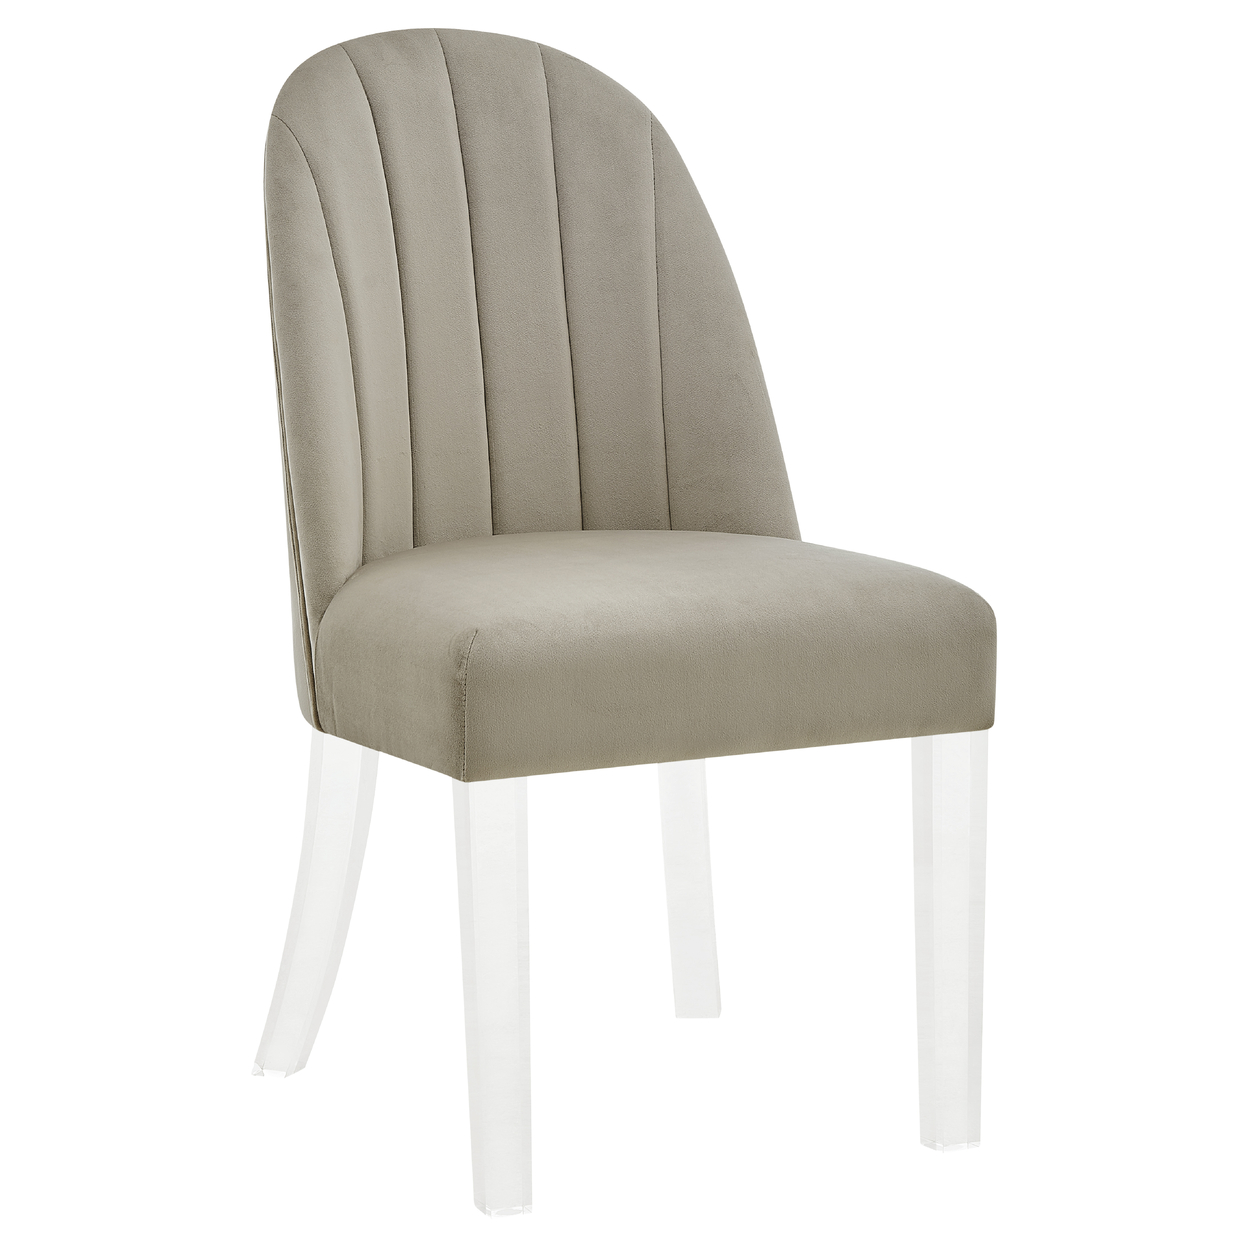 Iconic Home Milani Dining Side Chair Velvet Upholstered Channel Quilted Seat Back Acrylic Legs (Set Of 2) - Taupe